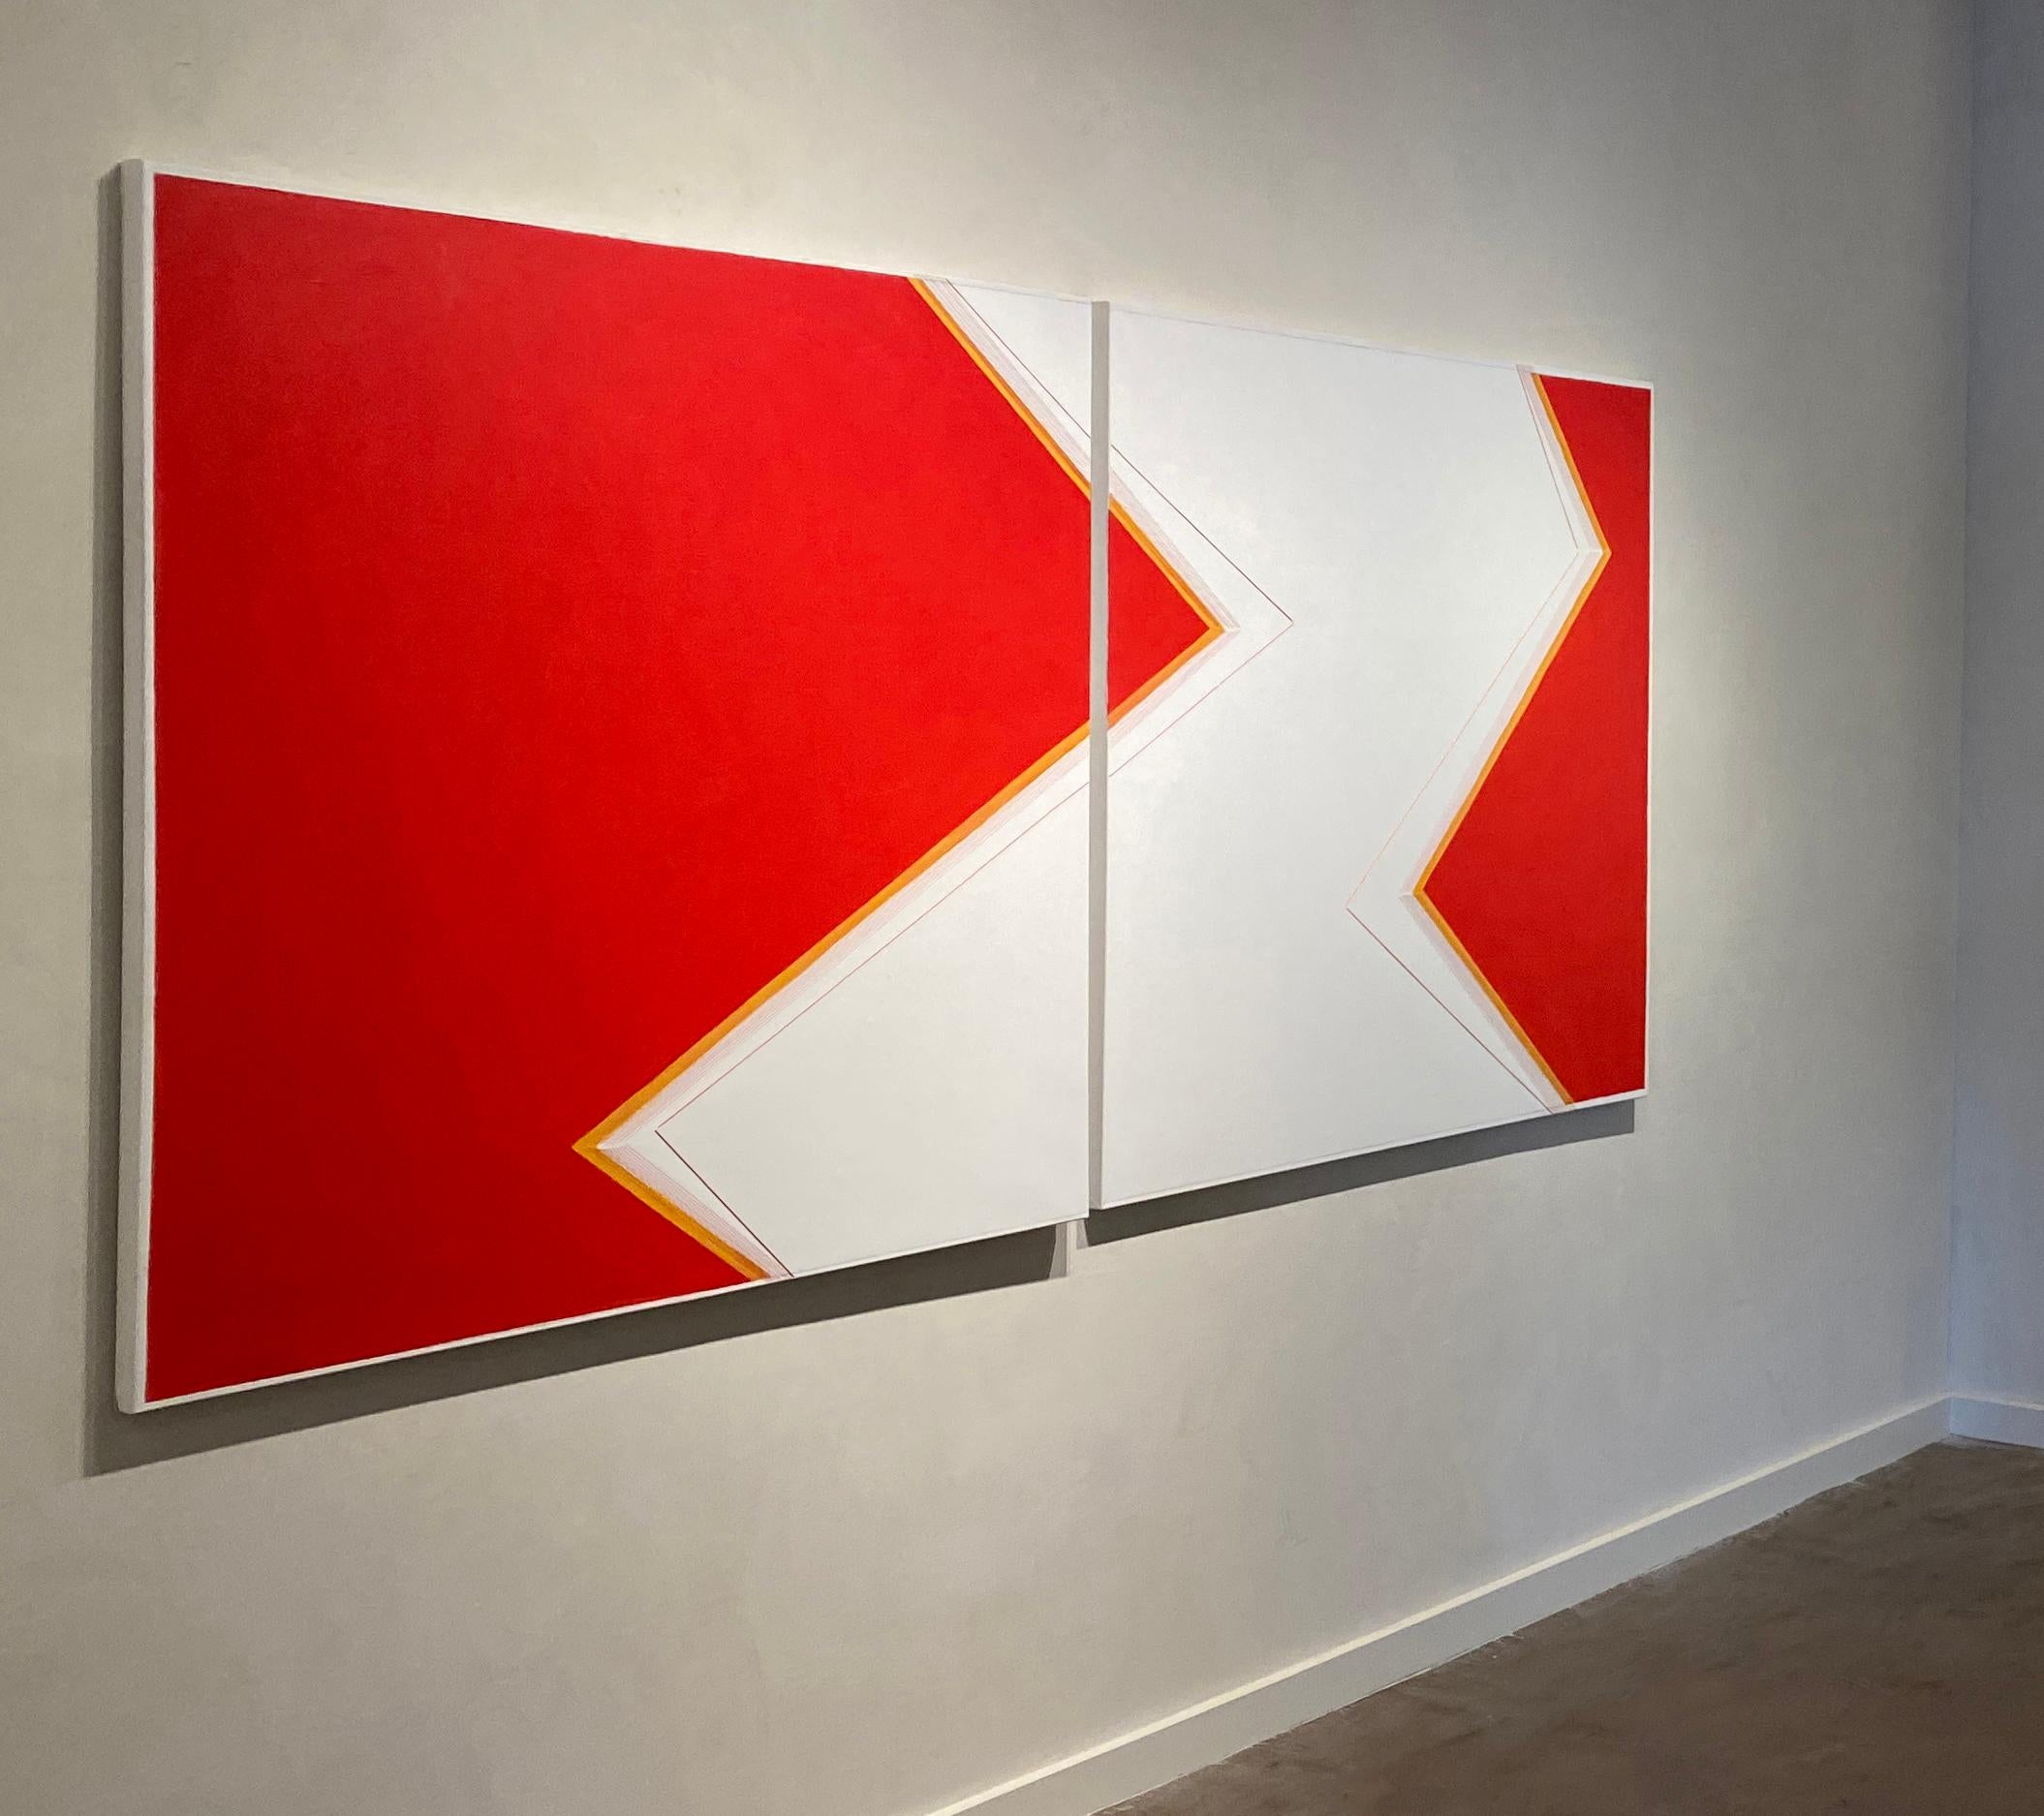 This graphic white, and red diptych by Holly Miller has pop-like shapes that extend above and below.  This is a bold and graphic painting that would brighten any room.

New York based painter Holly Miller pushes our preconceived understanding of